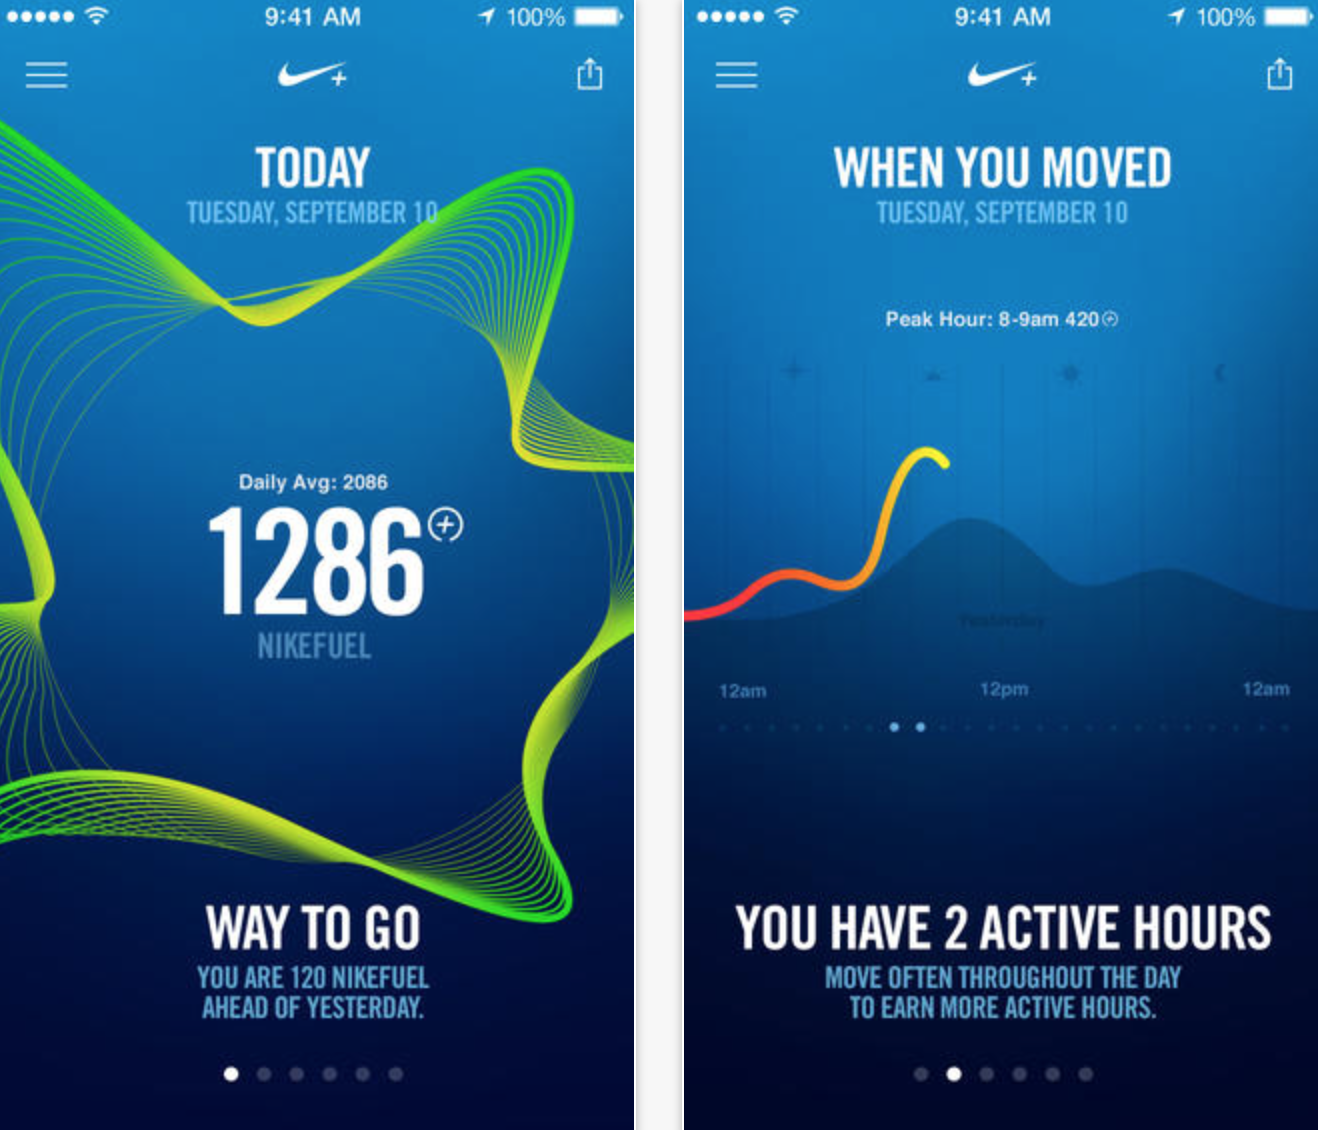 Introduced at 5s event, Nike+ Move fitness app launches 9to5Mac